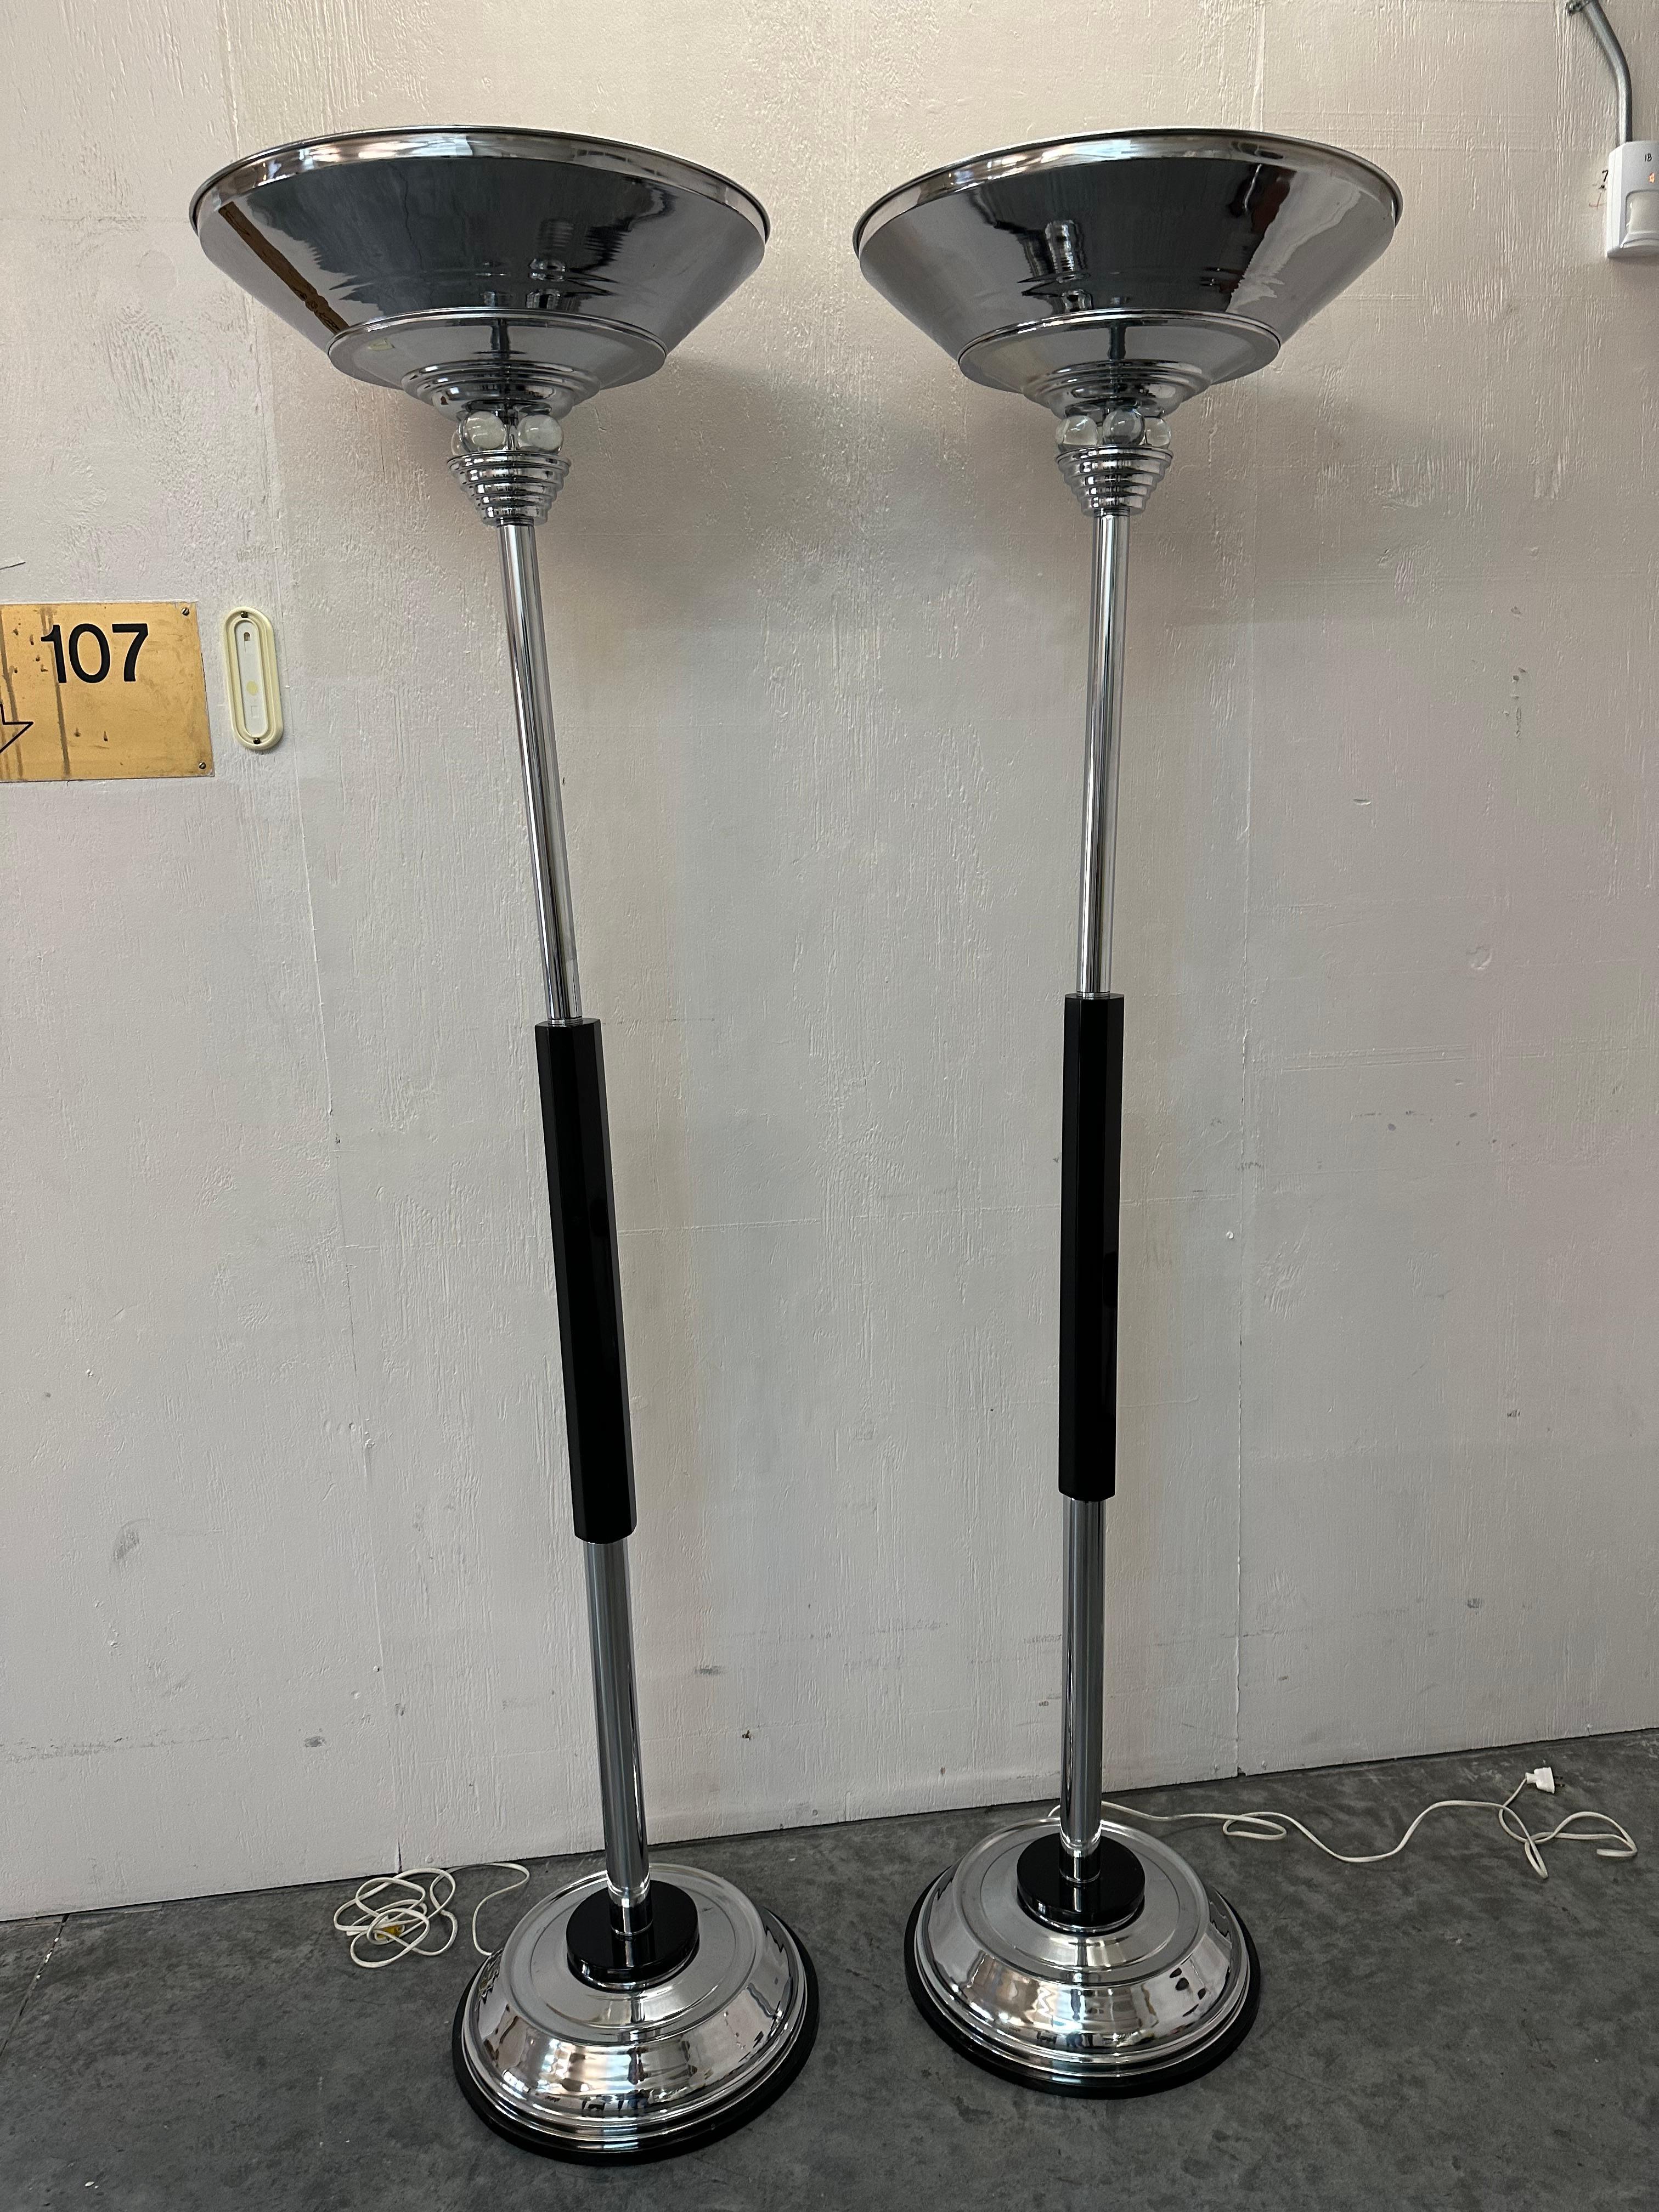 2 Art Deco Floor Lamps, France, Materials: Wood, glass and Chrome, 1940 For Sale 4